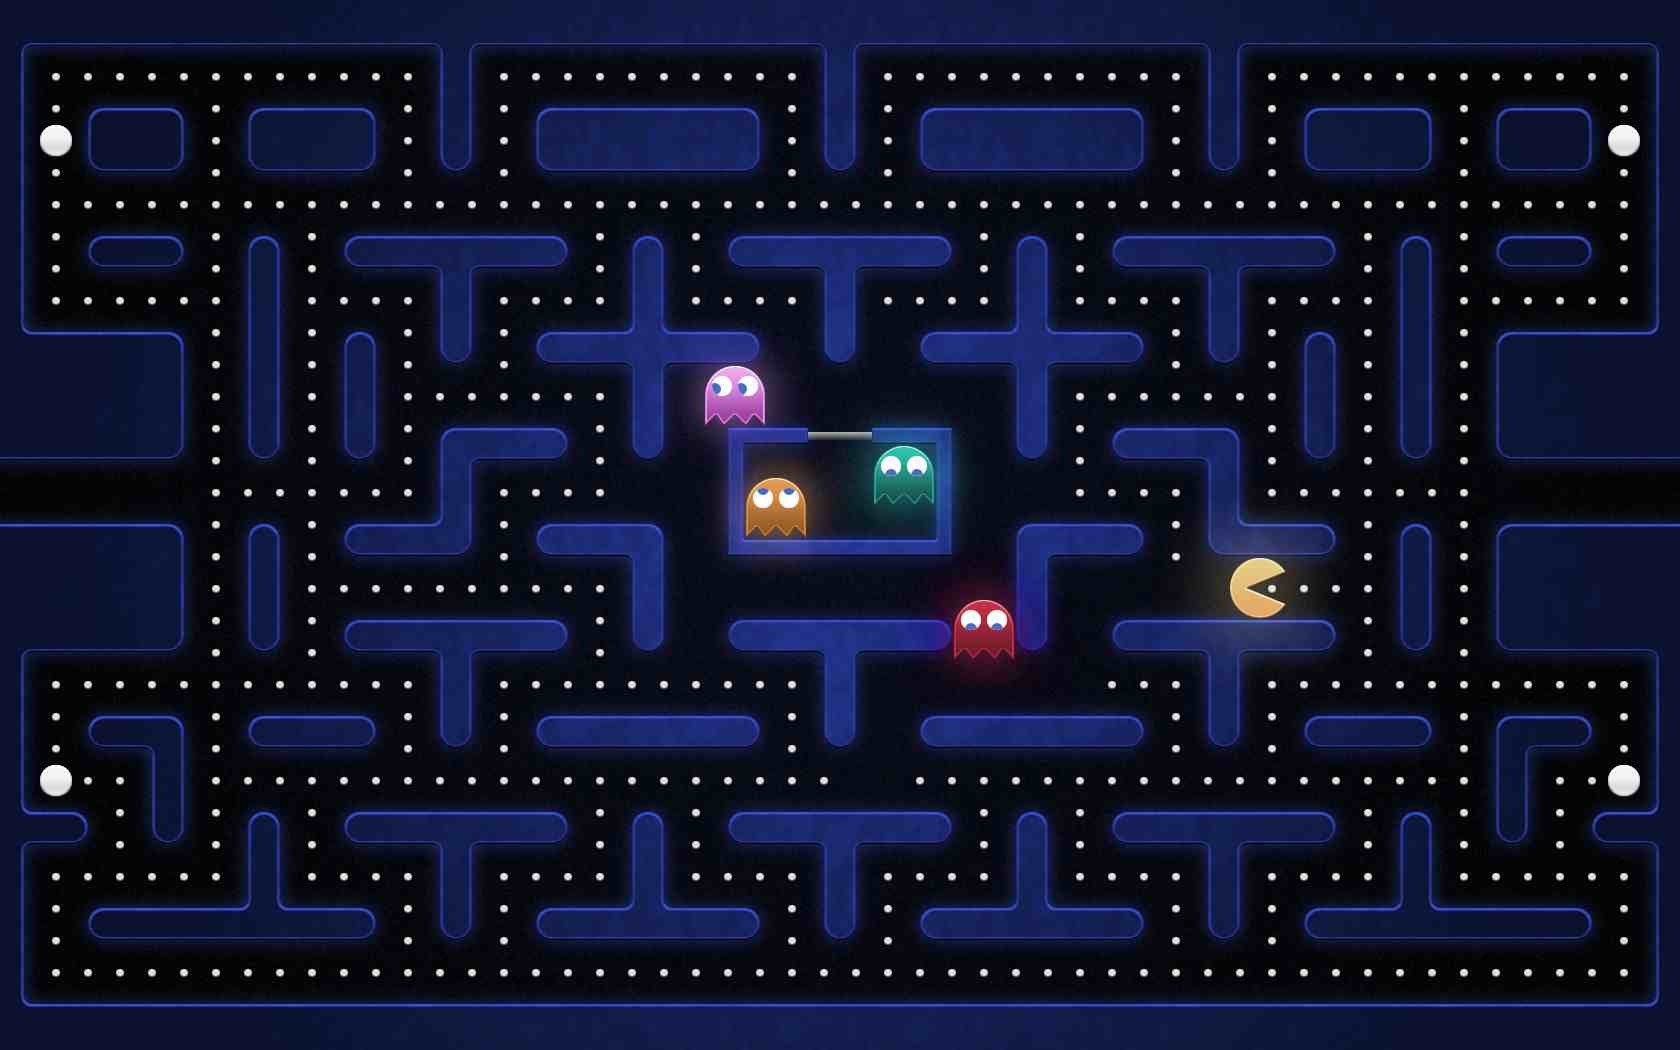 pacman game background